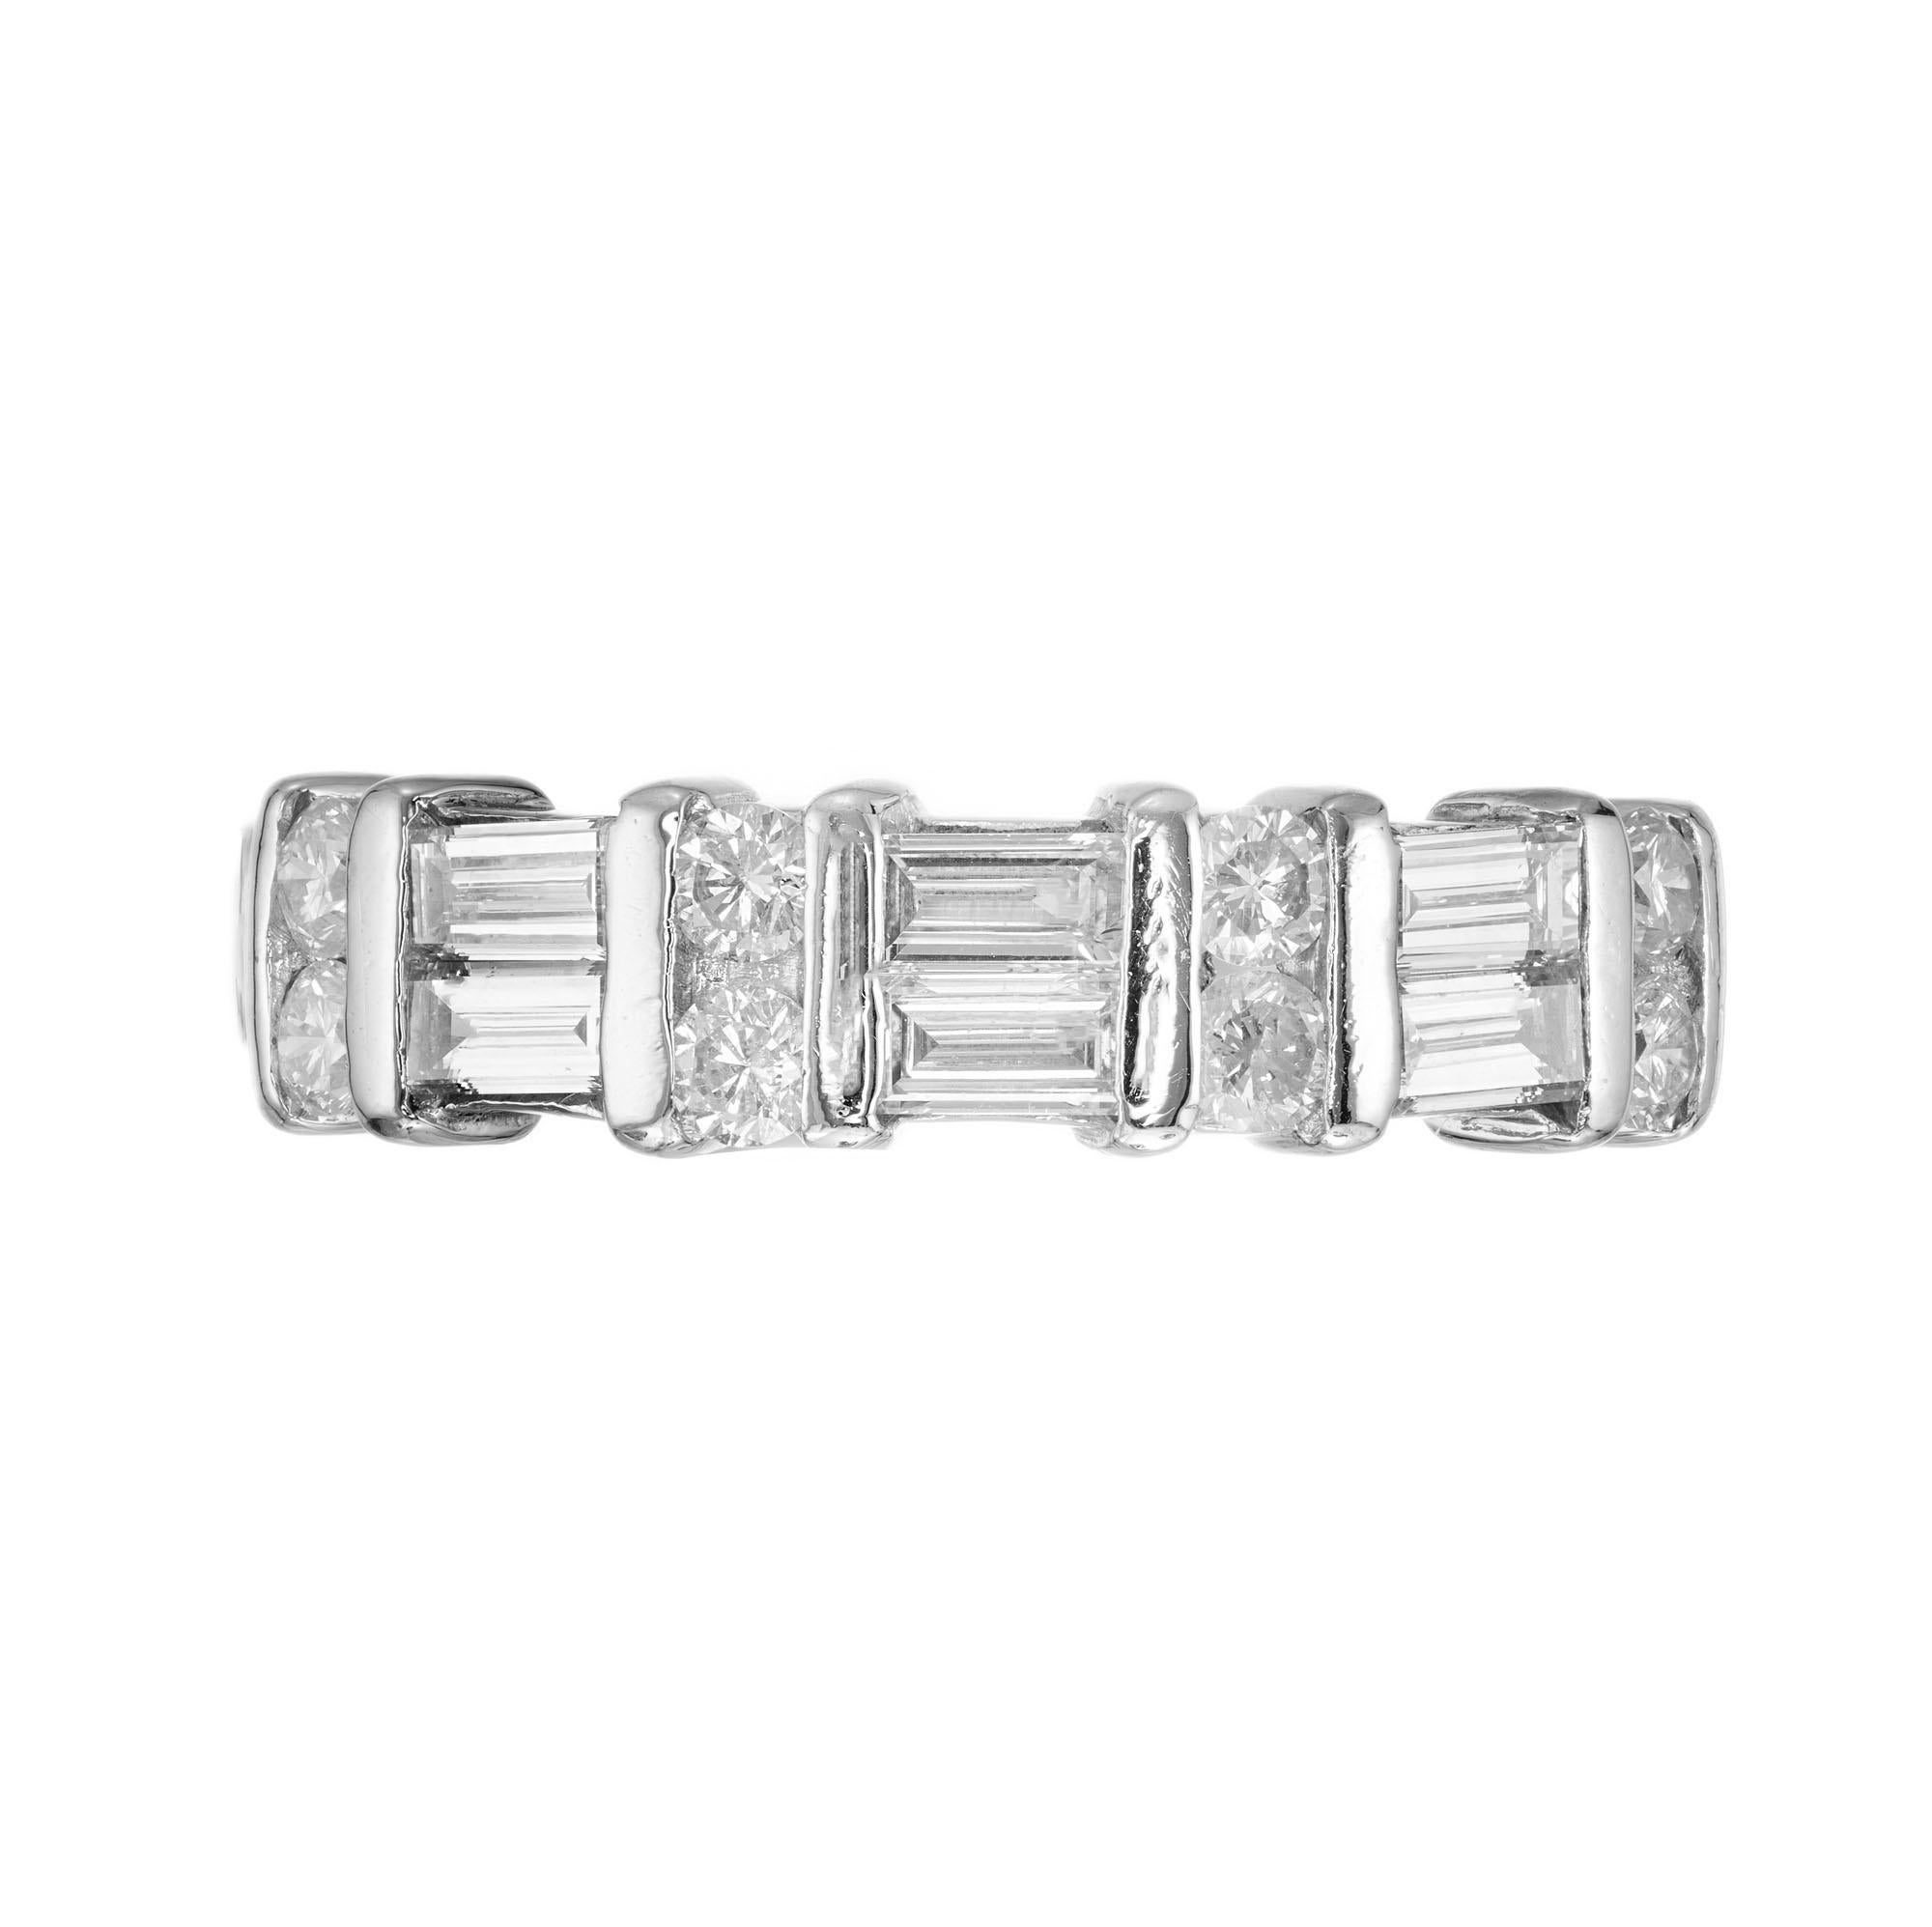 Two row platinum round and baguette diamond wedding band from Cardow

8 round brilliant cut diamond G VS-SI, Approx. .24cts
6 straight baguette diamonds G VS, Approx. .60cts
Size 6.5 and sizable +/- one size
Platinum 
Stamped: PT900
Hallmark: